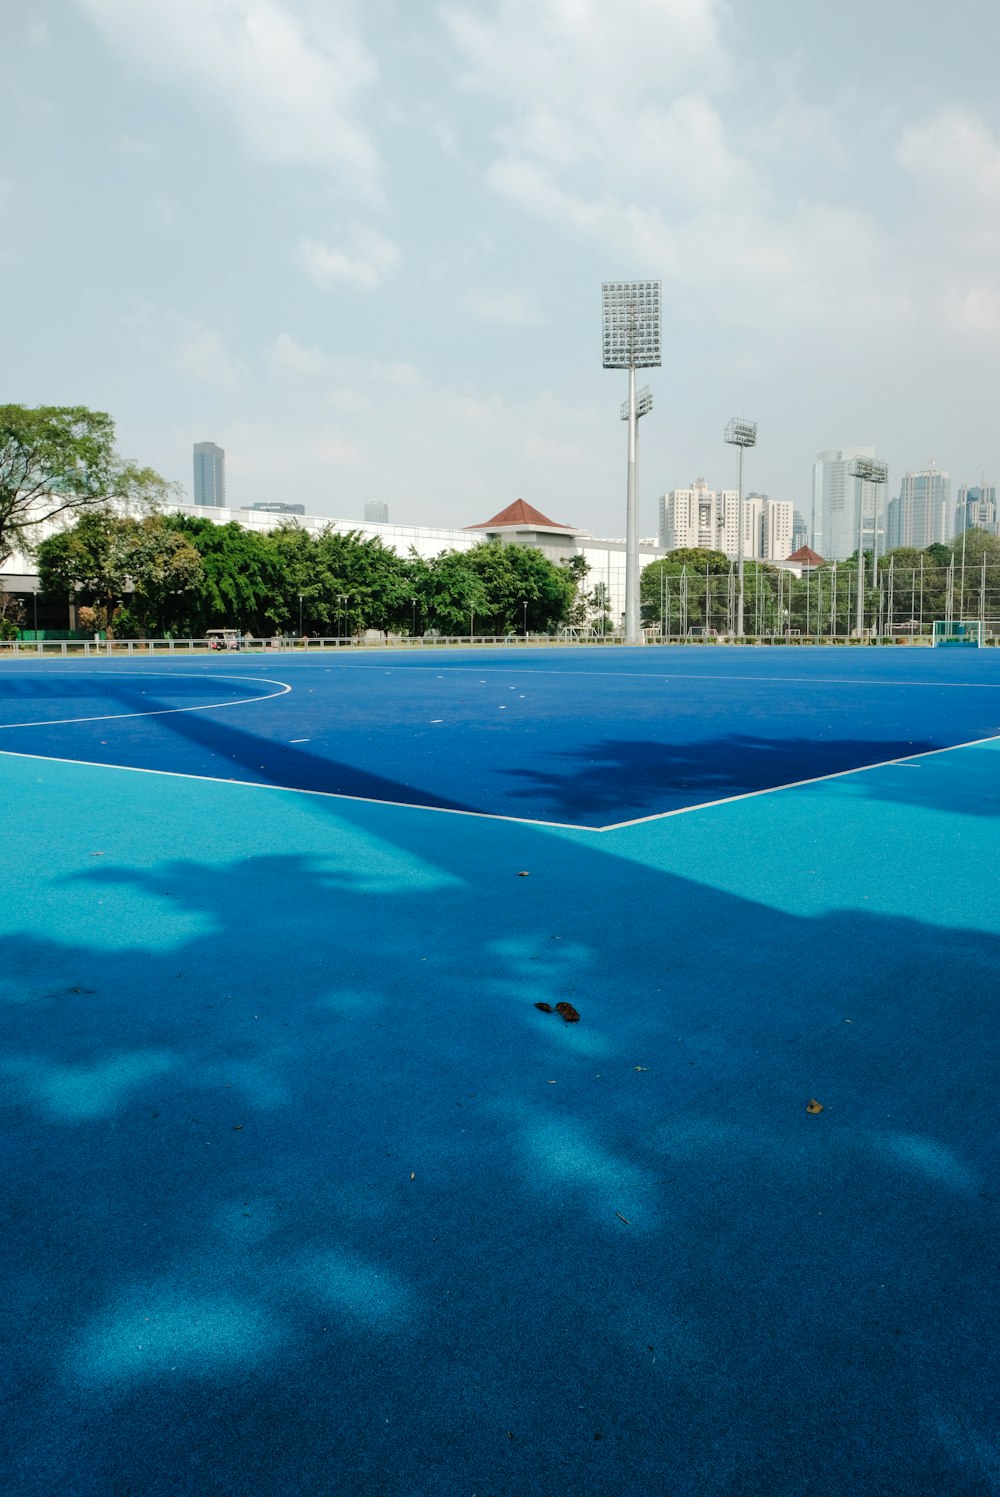 a blue tennis court with a sky background